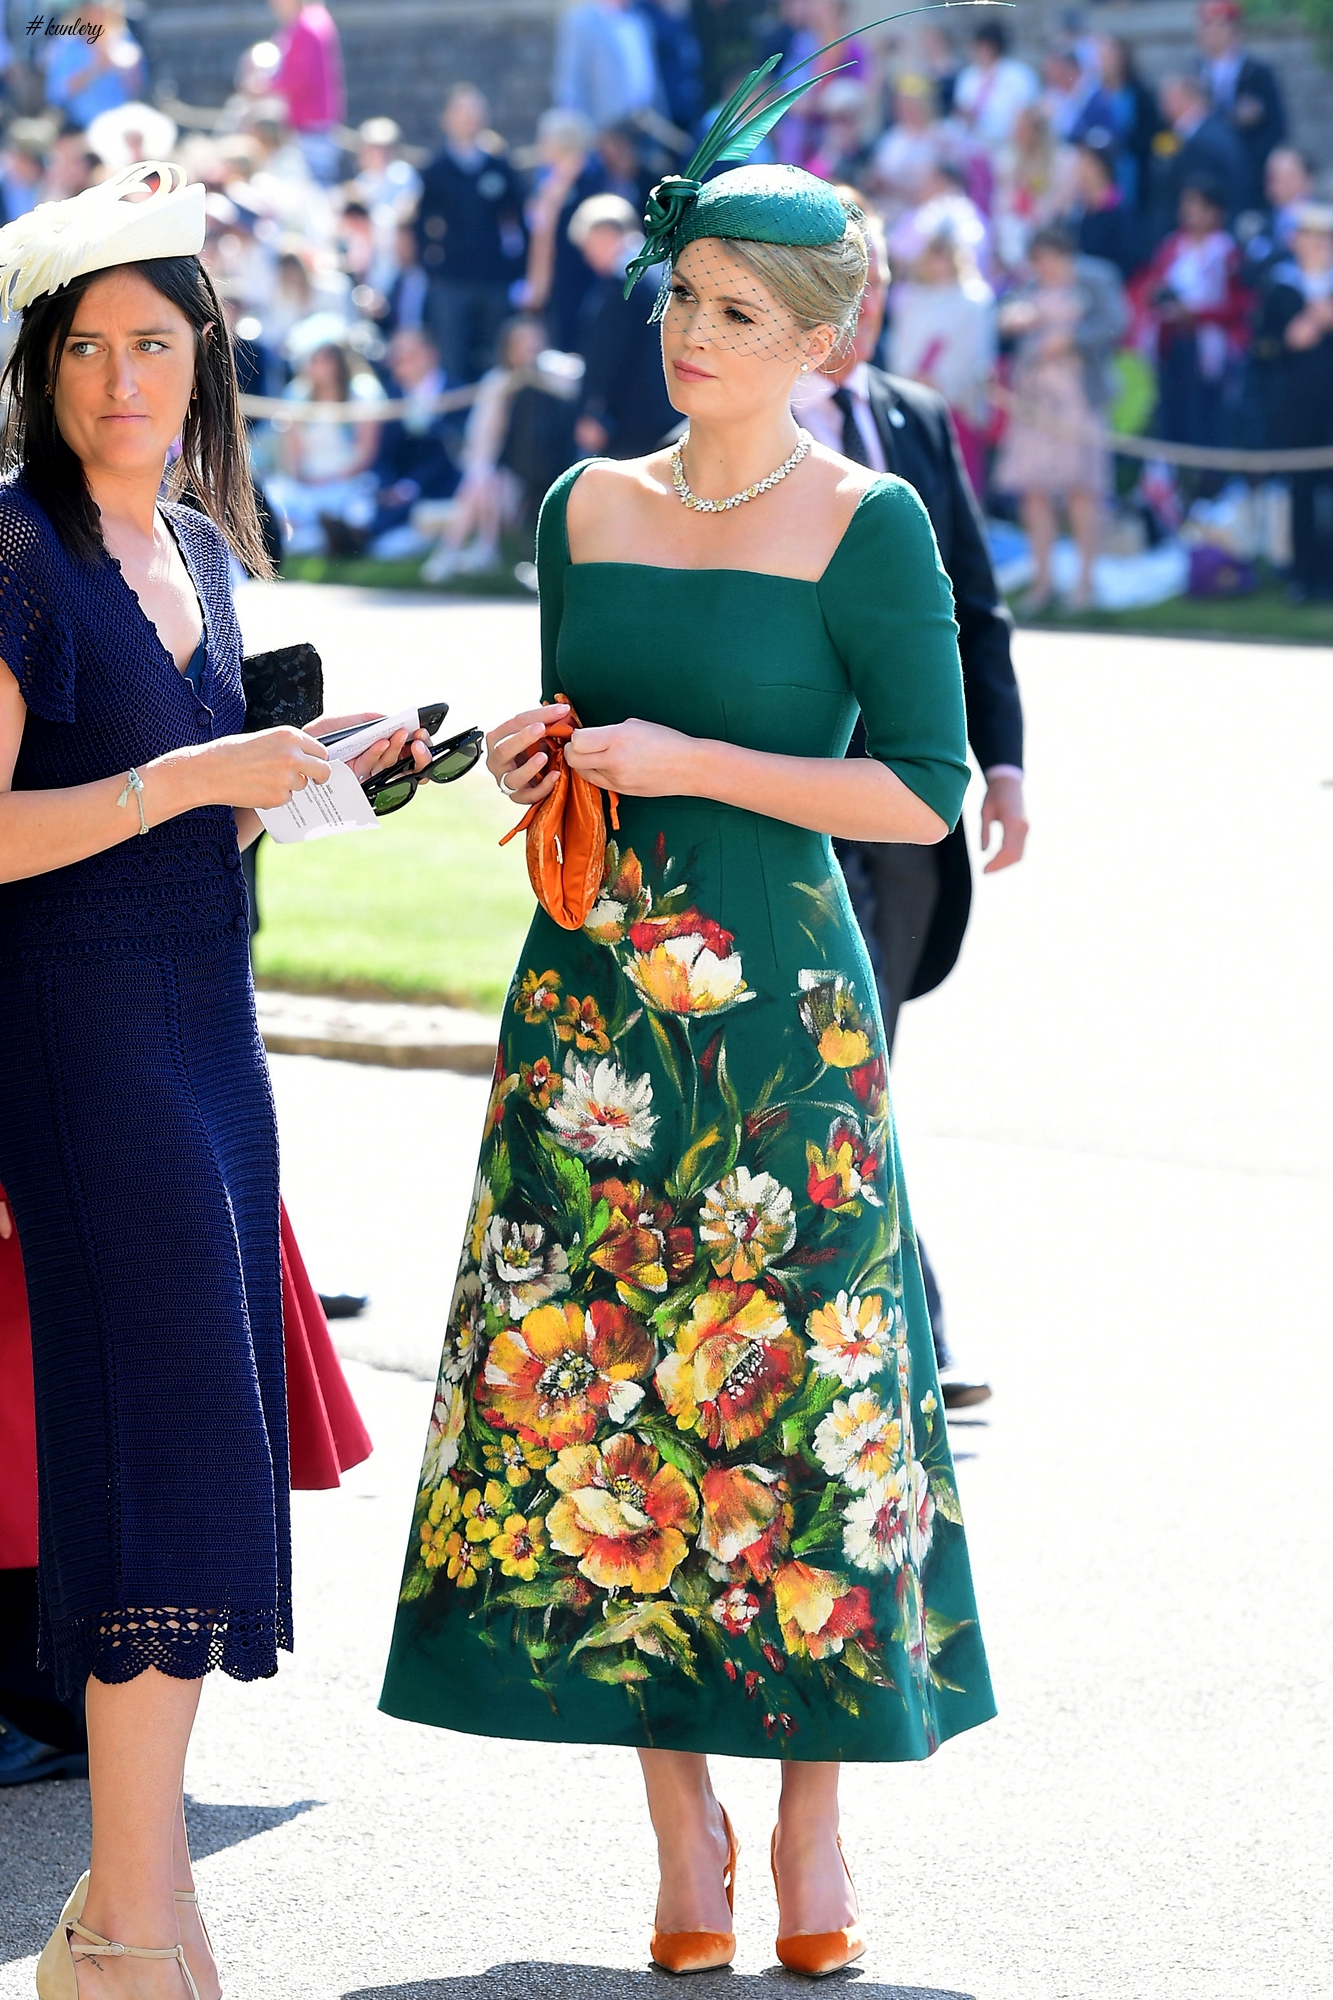 Best Dressed Guests At Prince Harry & Meghan Markle’s Royal Wedding!